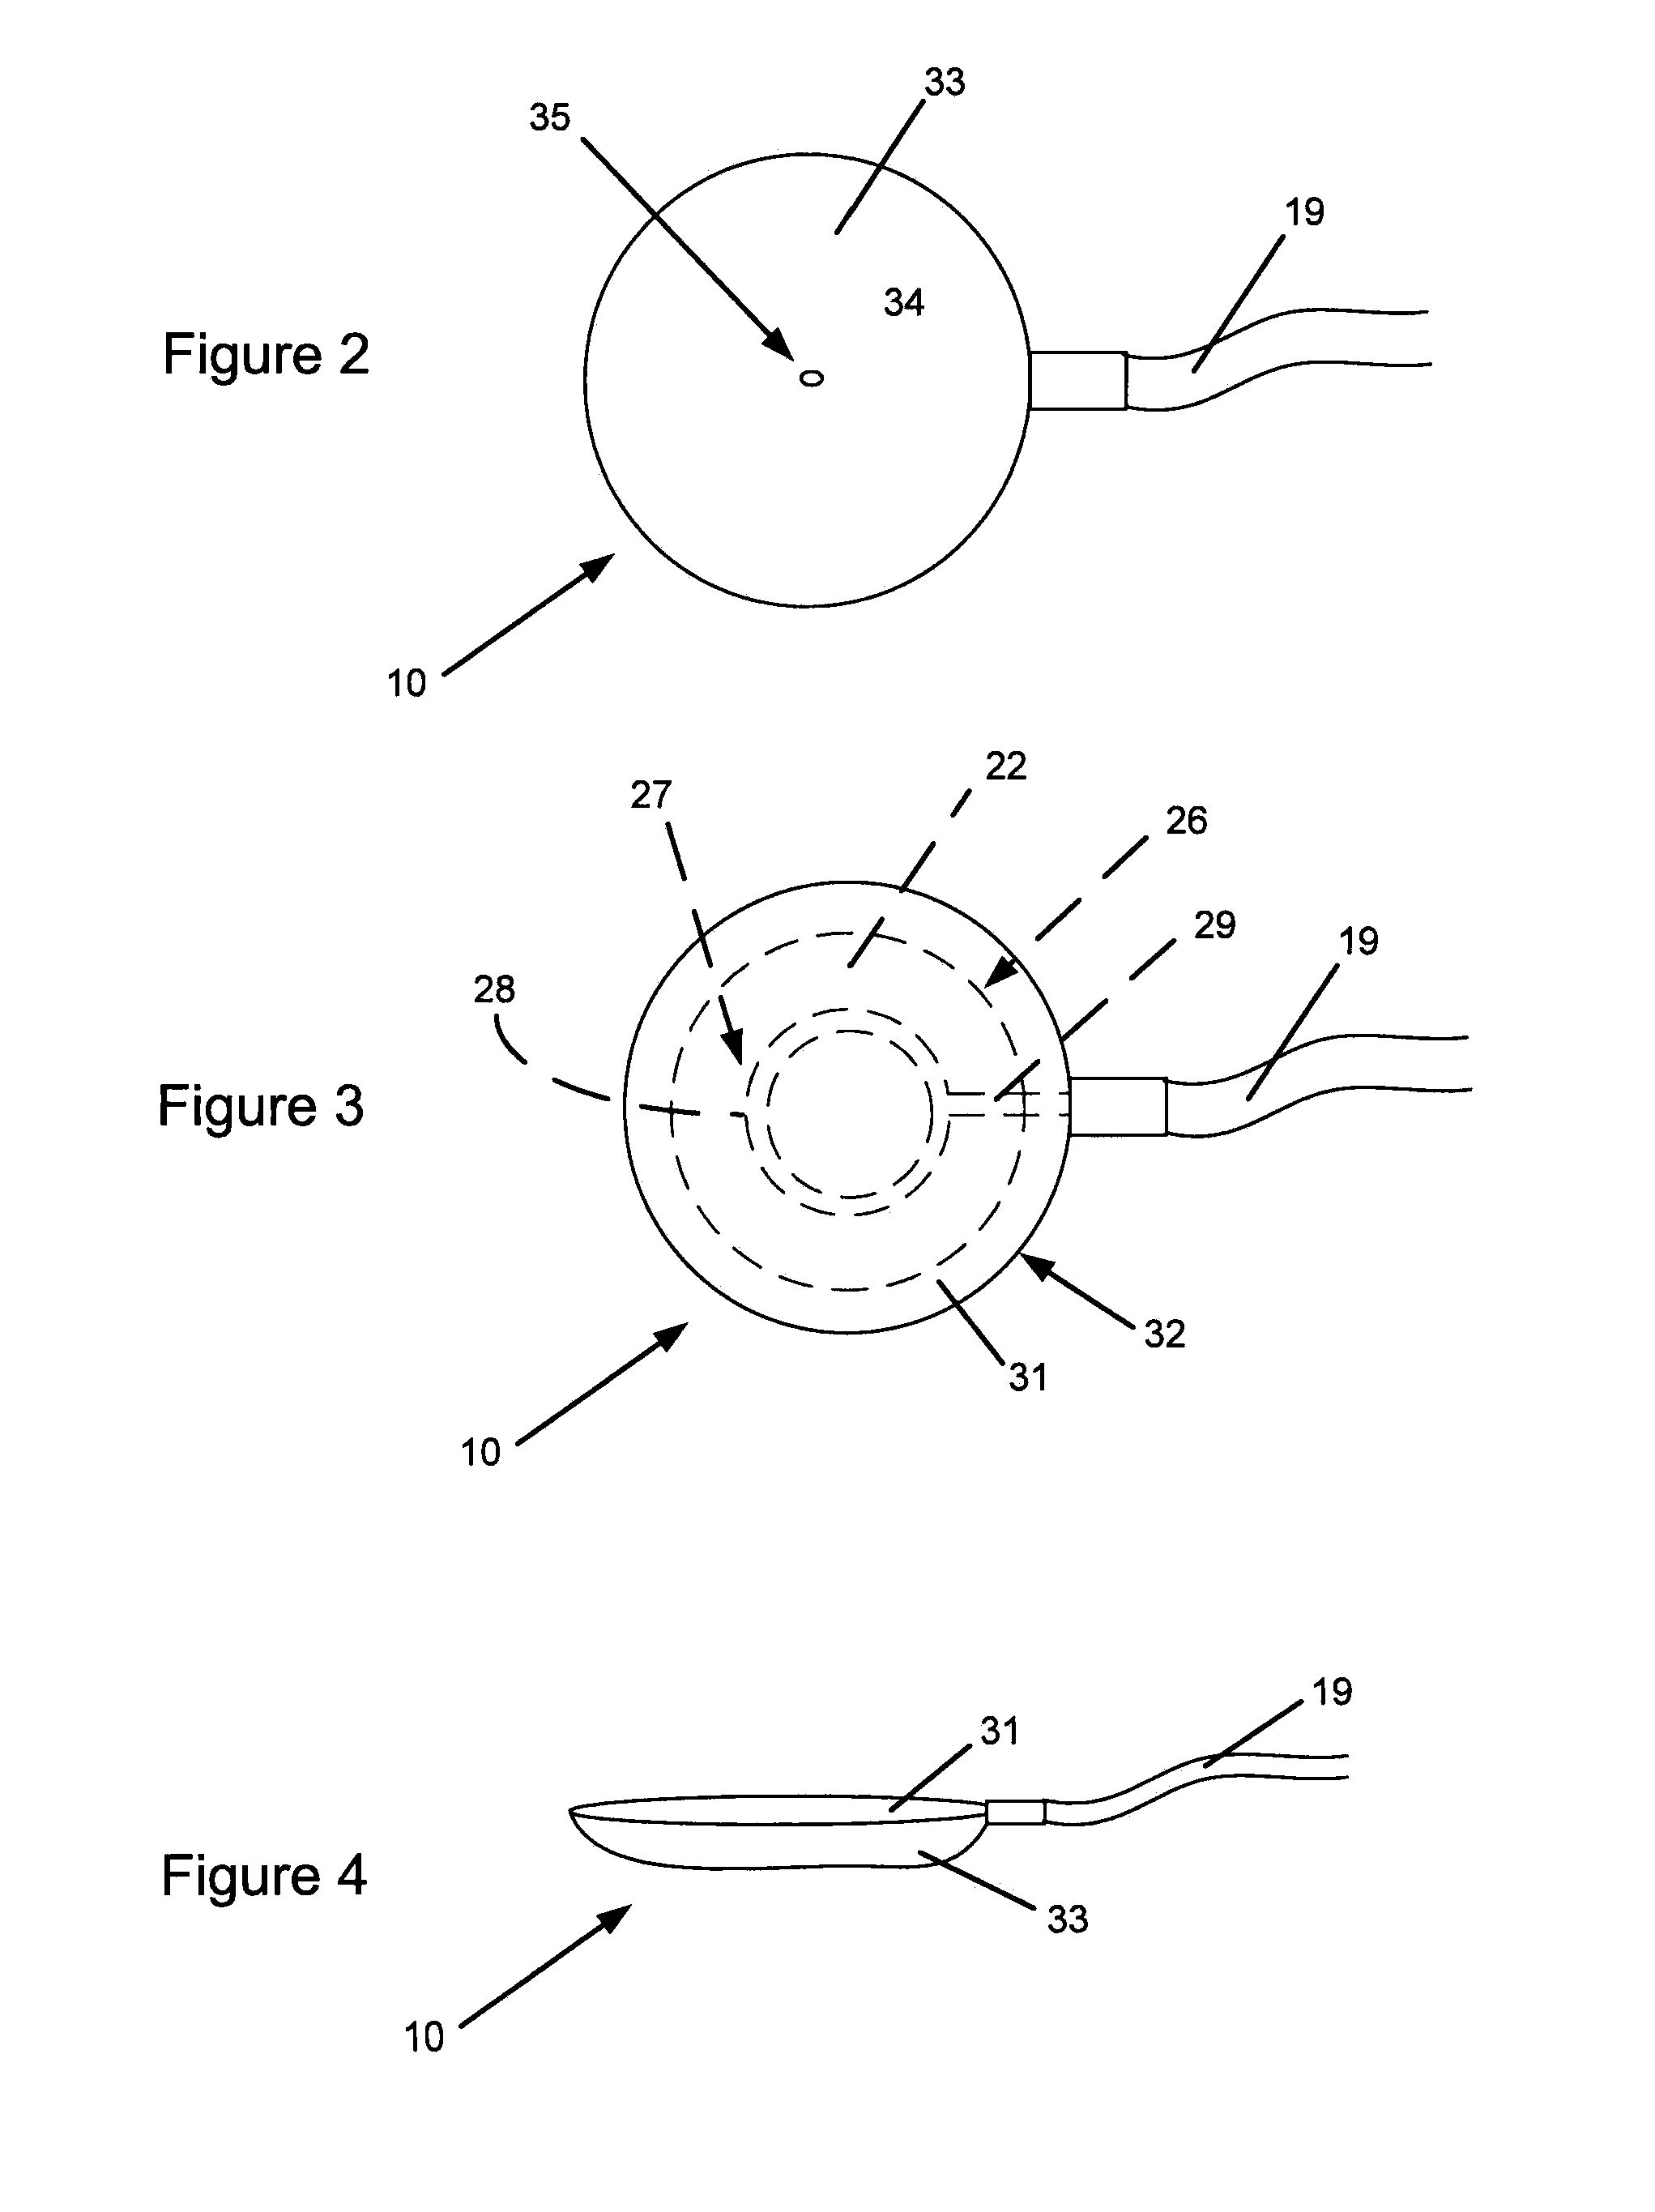 Actuator for delivery of vibratory stimulation to an area of the body and method of application